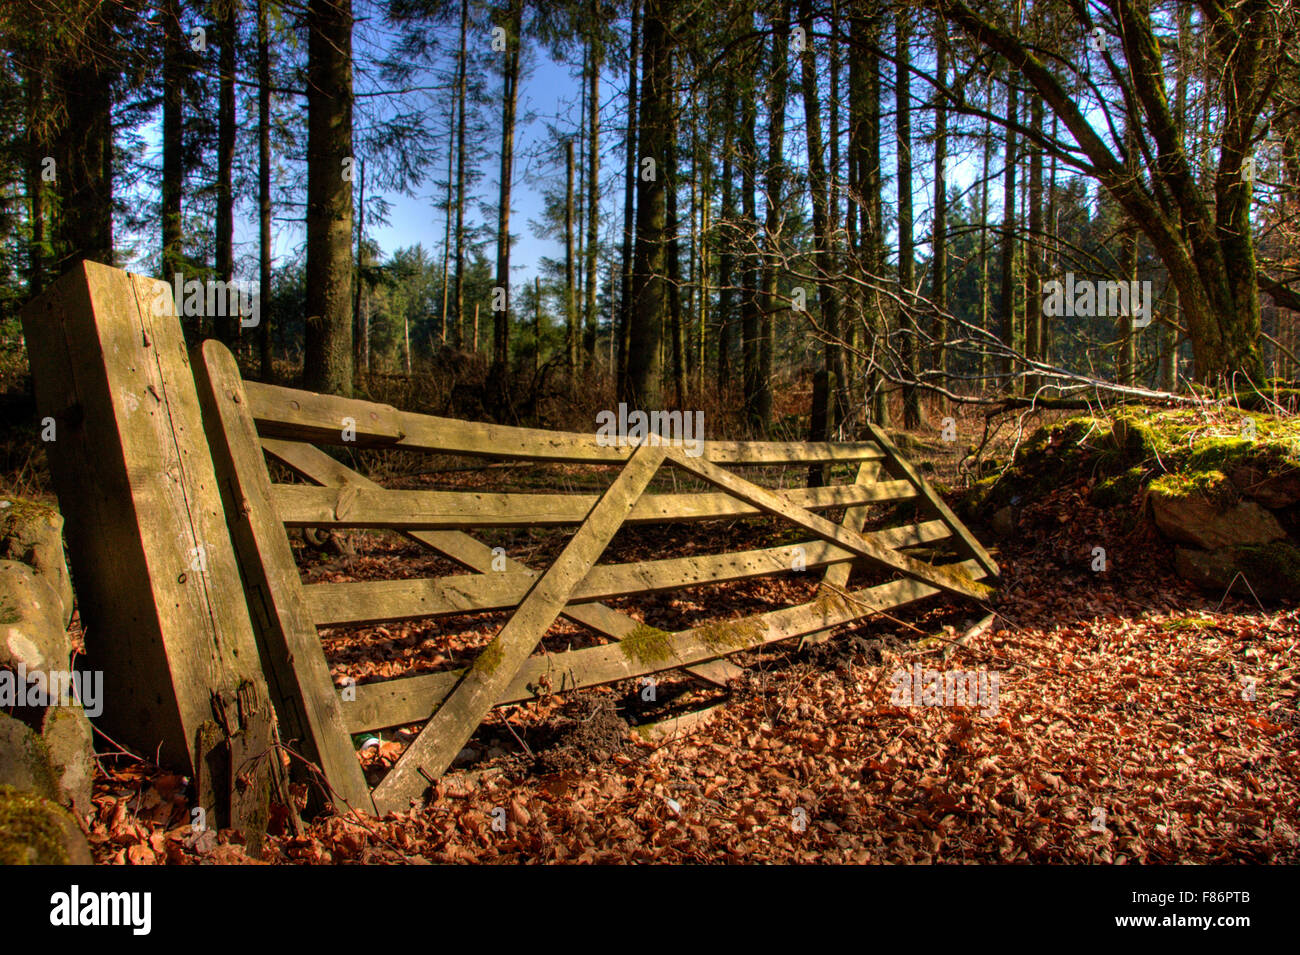 beech leaves witness to the fact that no one has used this gate for a long time. Stock Photo